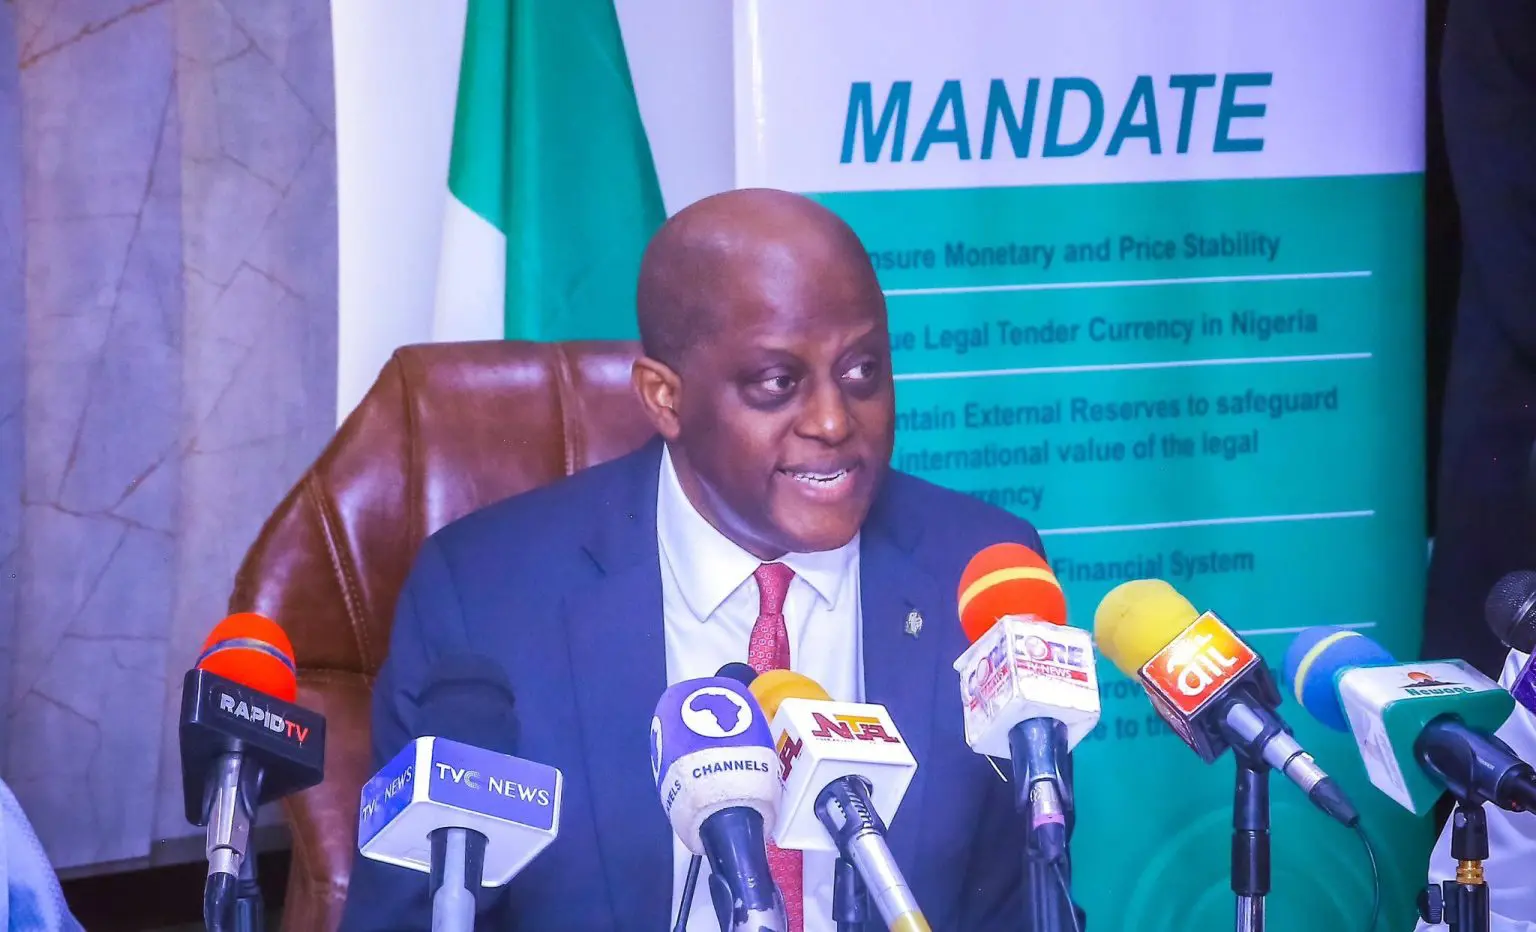 CBN governor, Cardoso reveals why there’s hyper food inflation